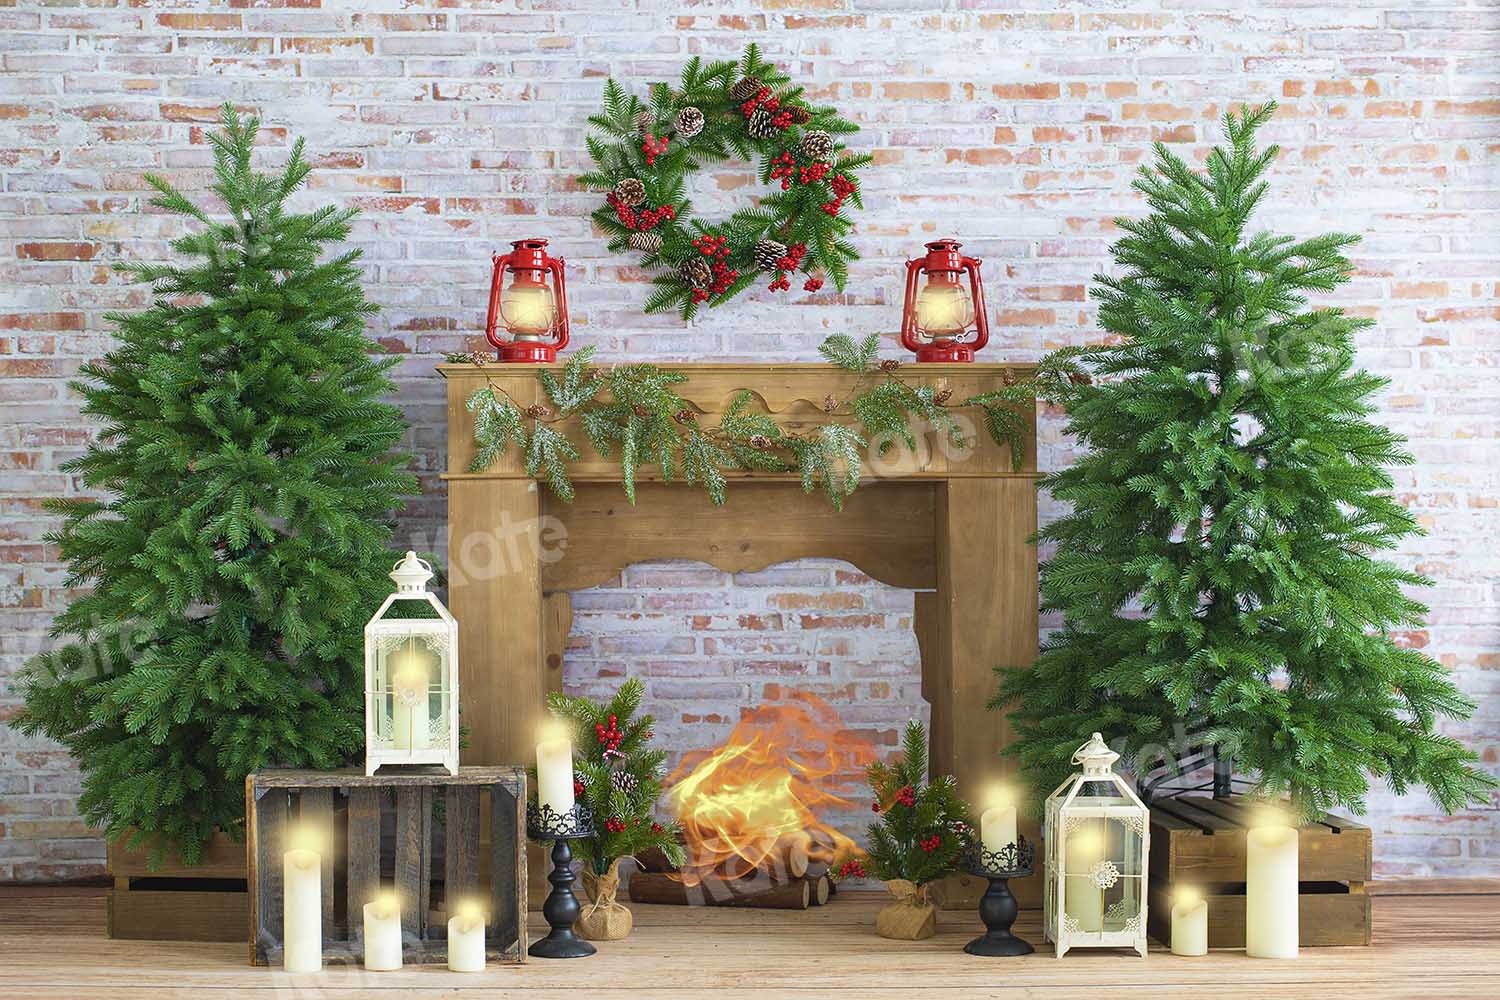 Kate Christmas Candle White Brick Fireplace Backdrop Designed by Emetselch